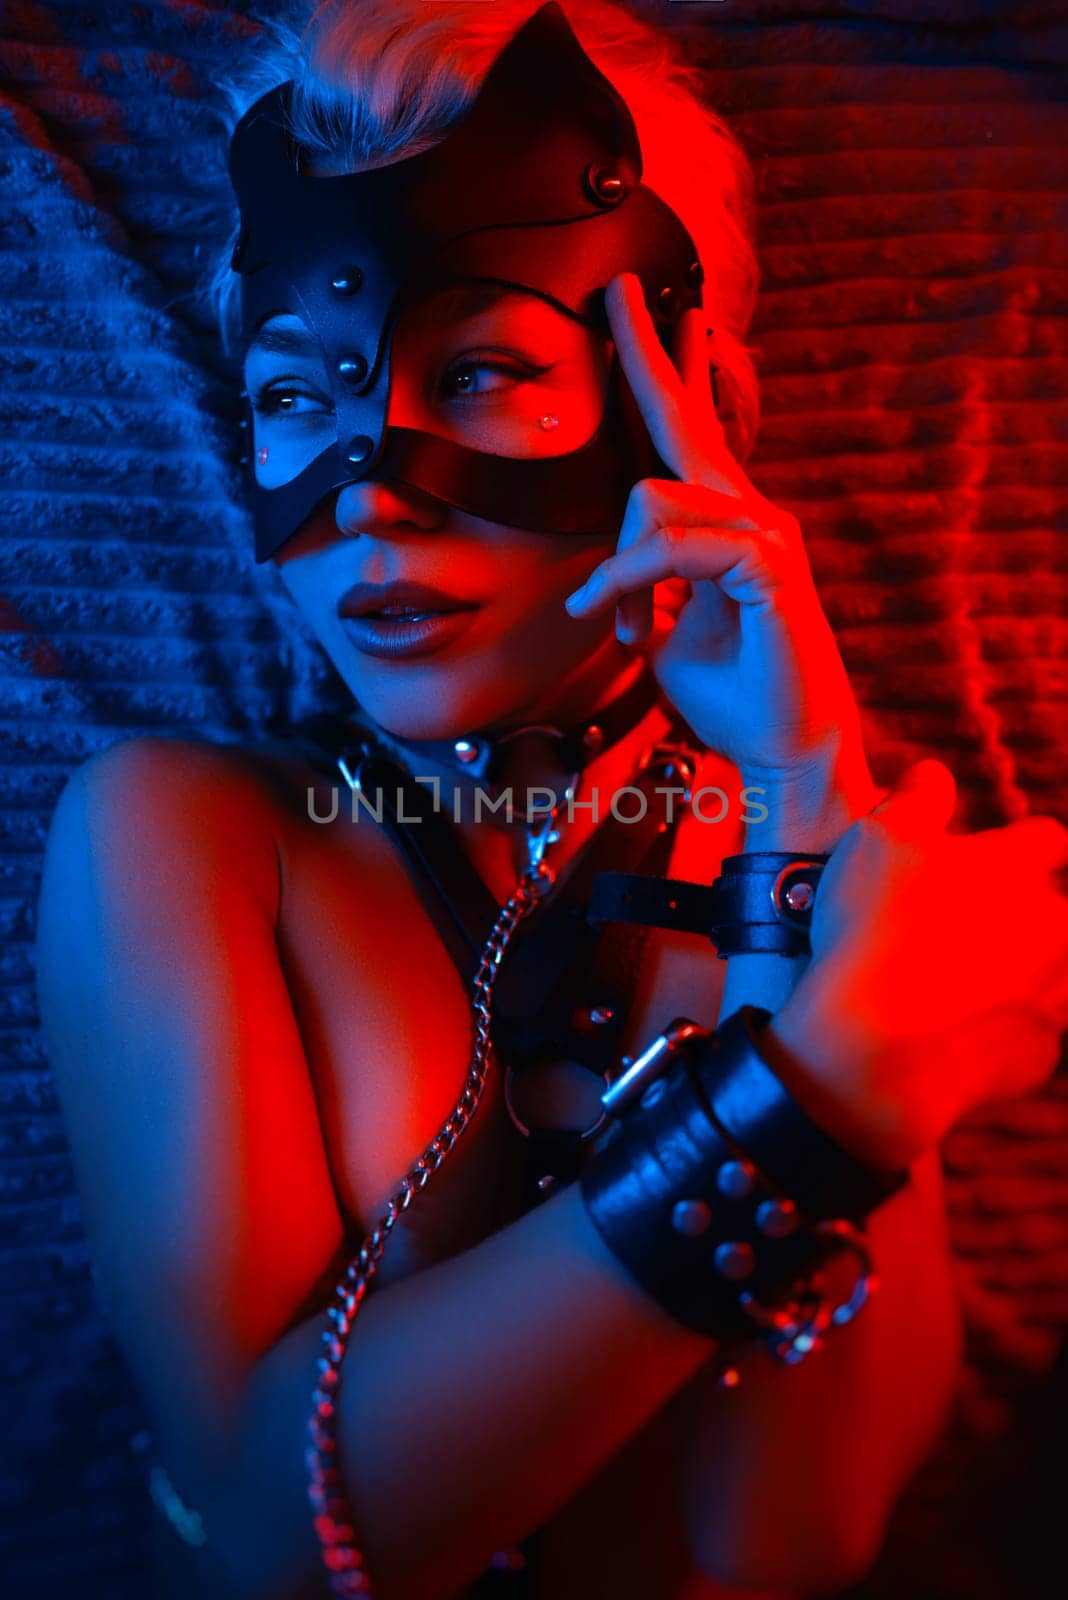 portrait of a sexy girl in leather cat mask and bdsm accessories with beautiful lips and eyes with emotions in neon light